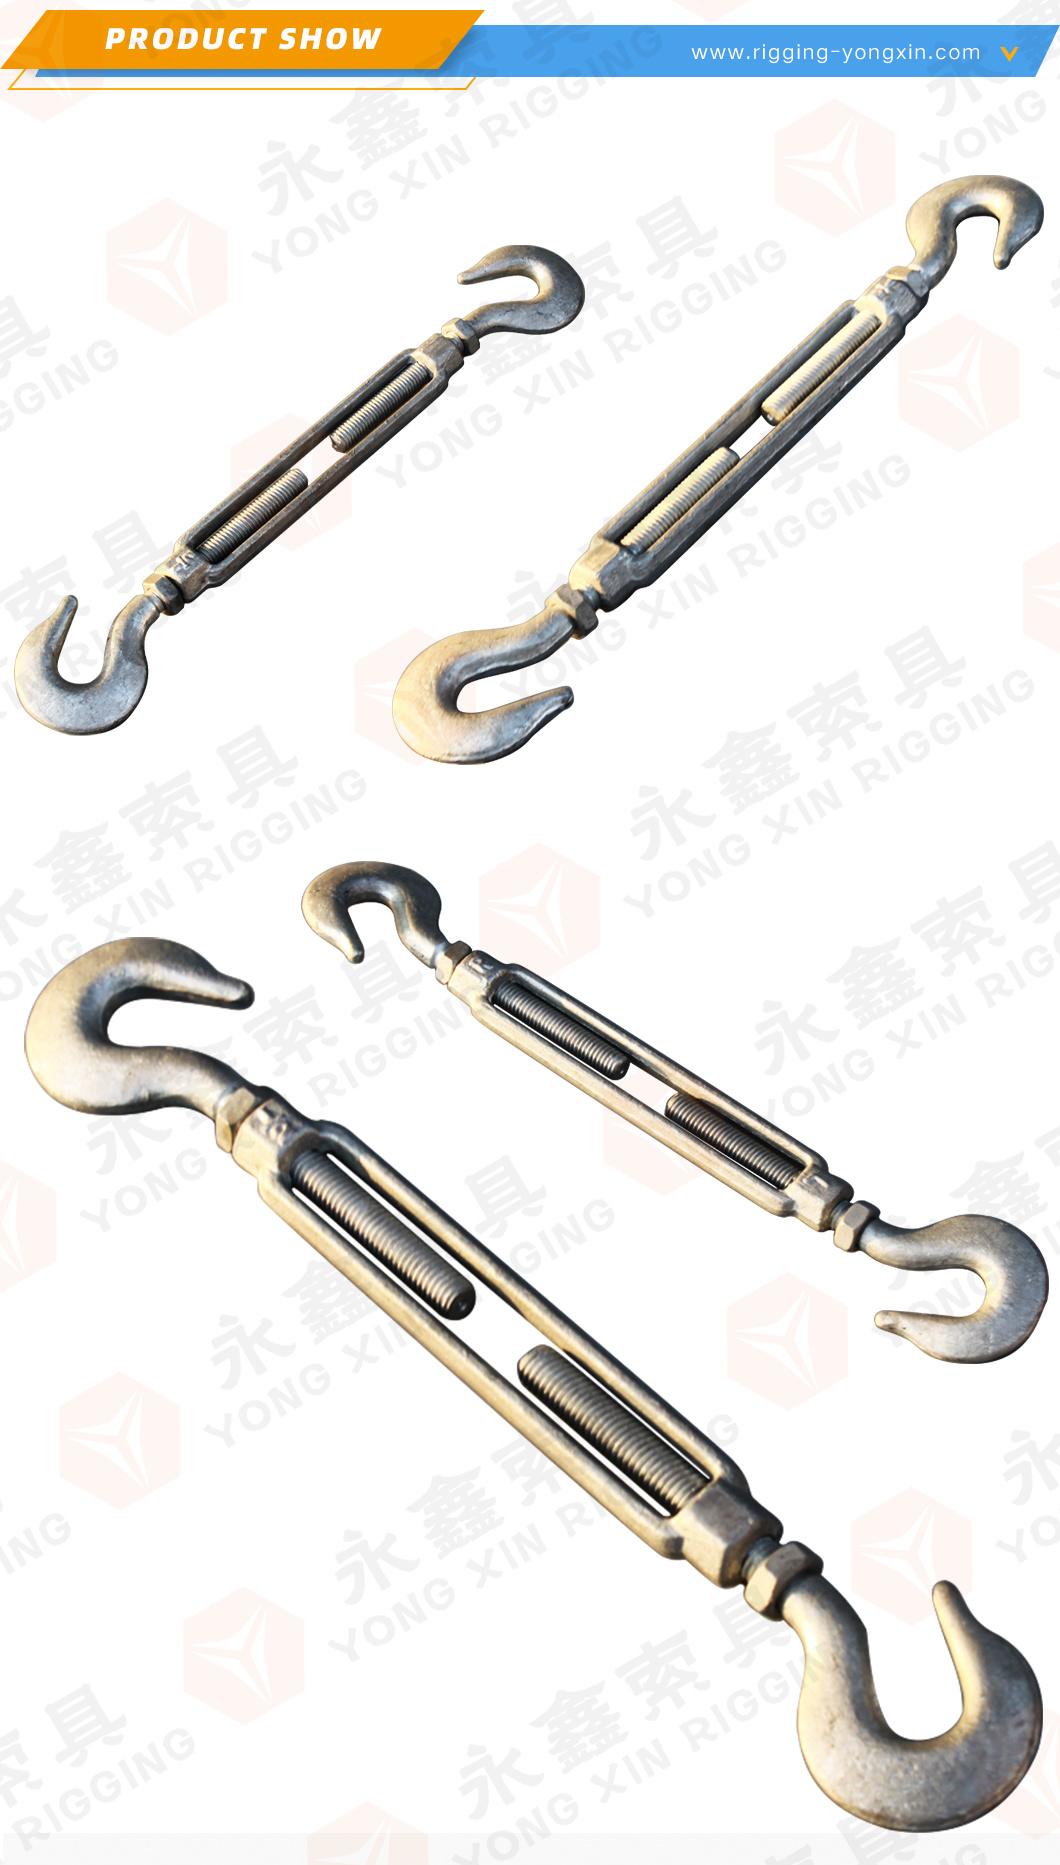 DIN1480 Heavy Duty Galvanized Turnbuckle with Hook to Hook